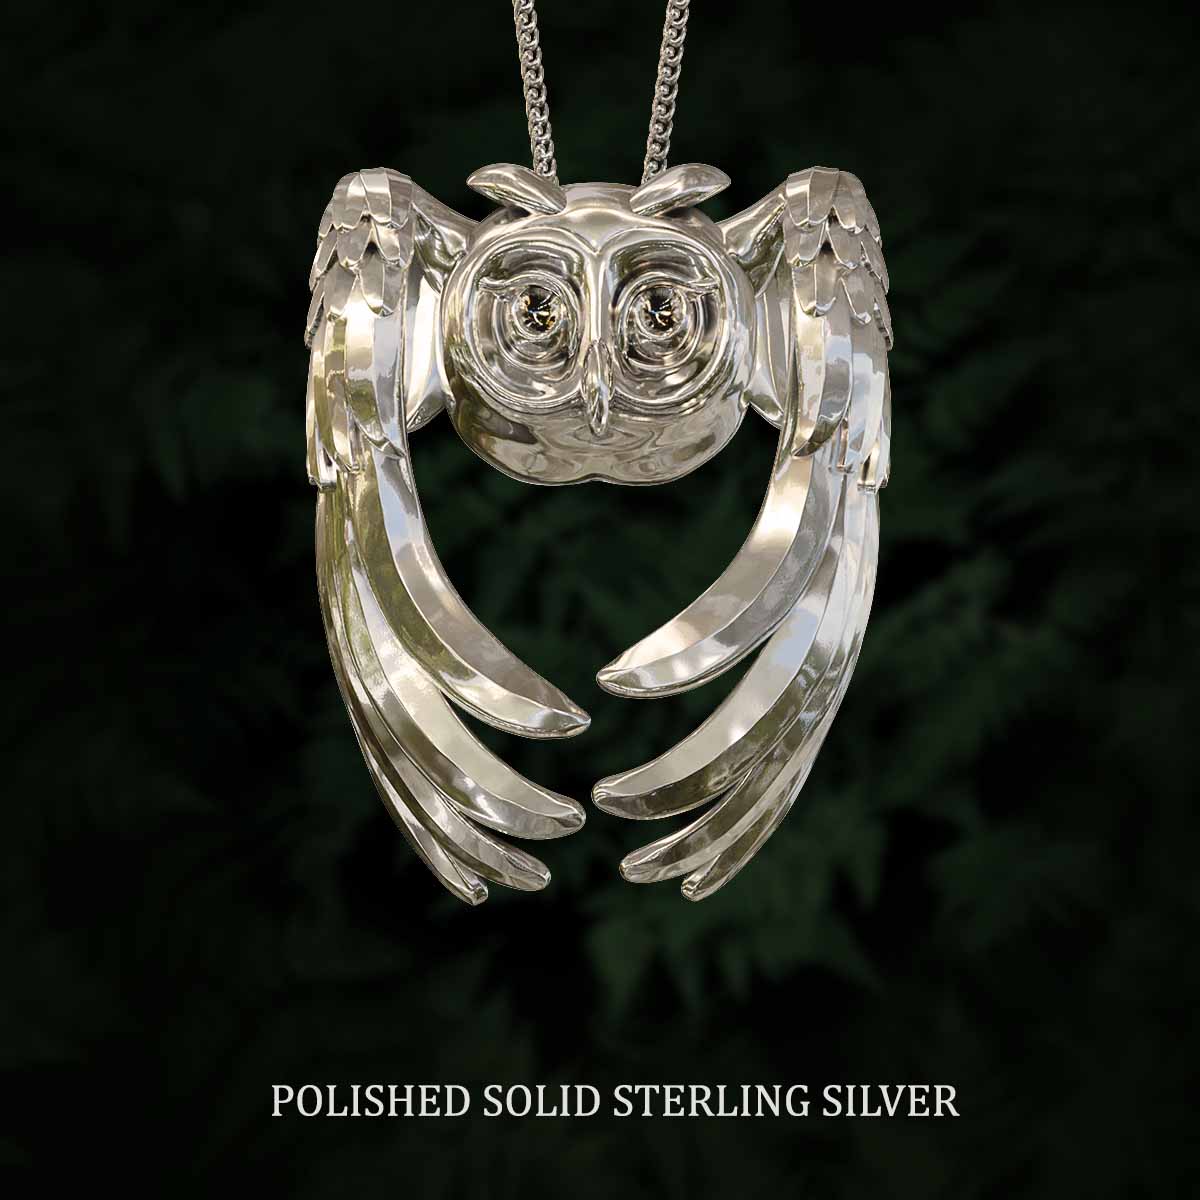 Polished-Solid-Sterling-Silver-Owl-Pendant-Jewelry-For-Necklace